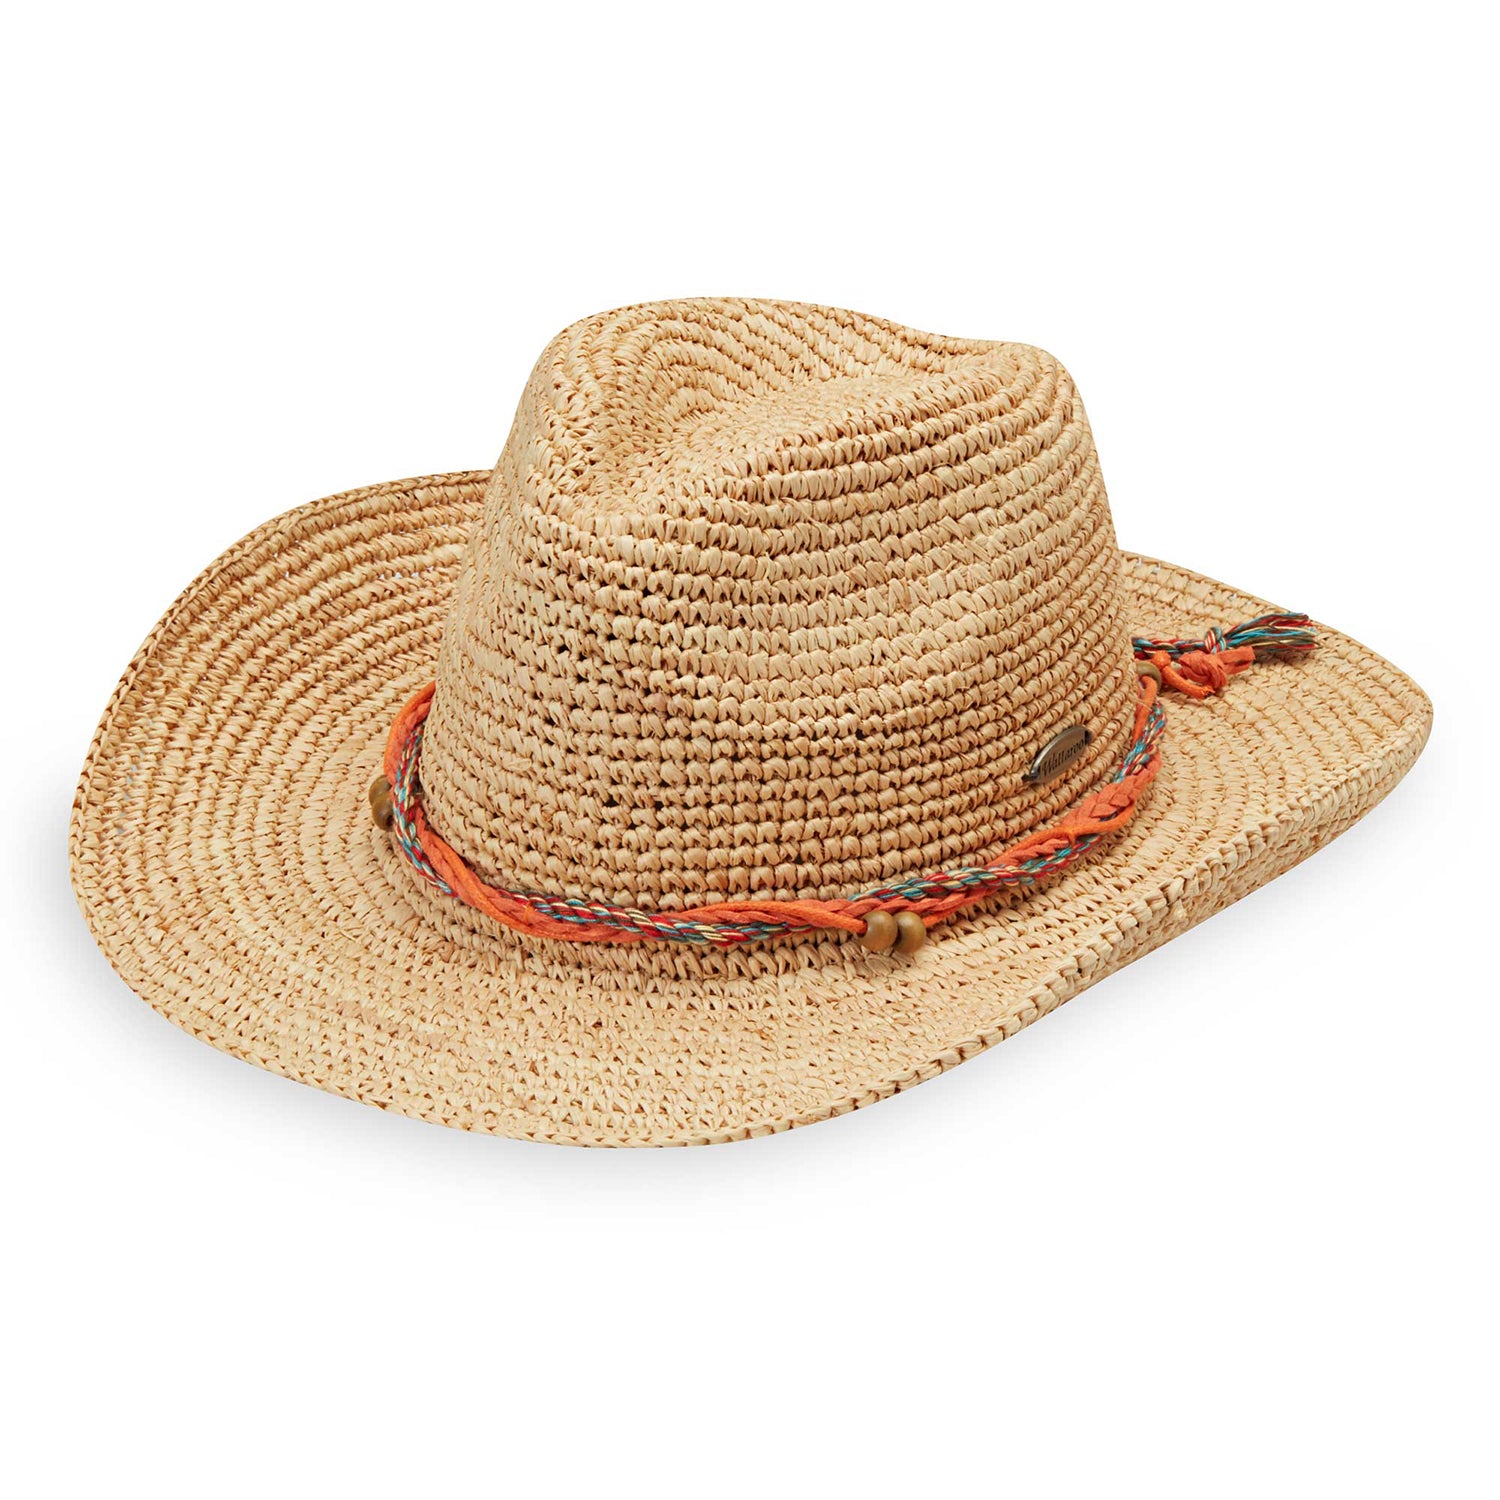 Featuring Women's petite catalina cowboy straw sun hat for summer by Wallaroo 